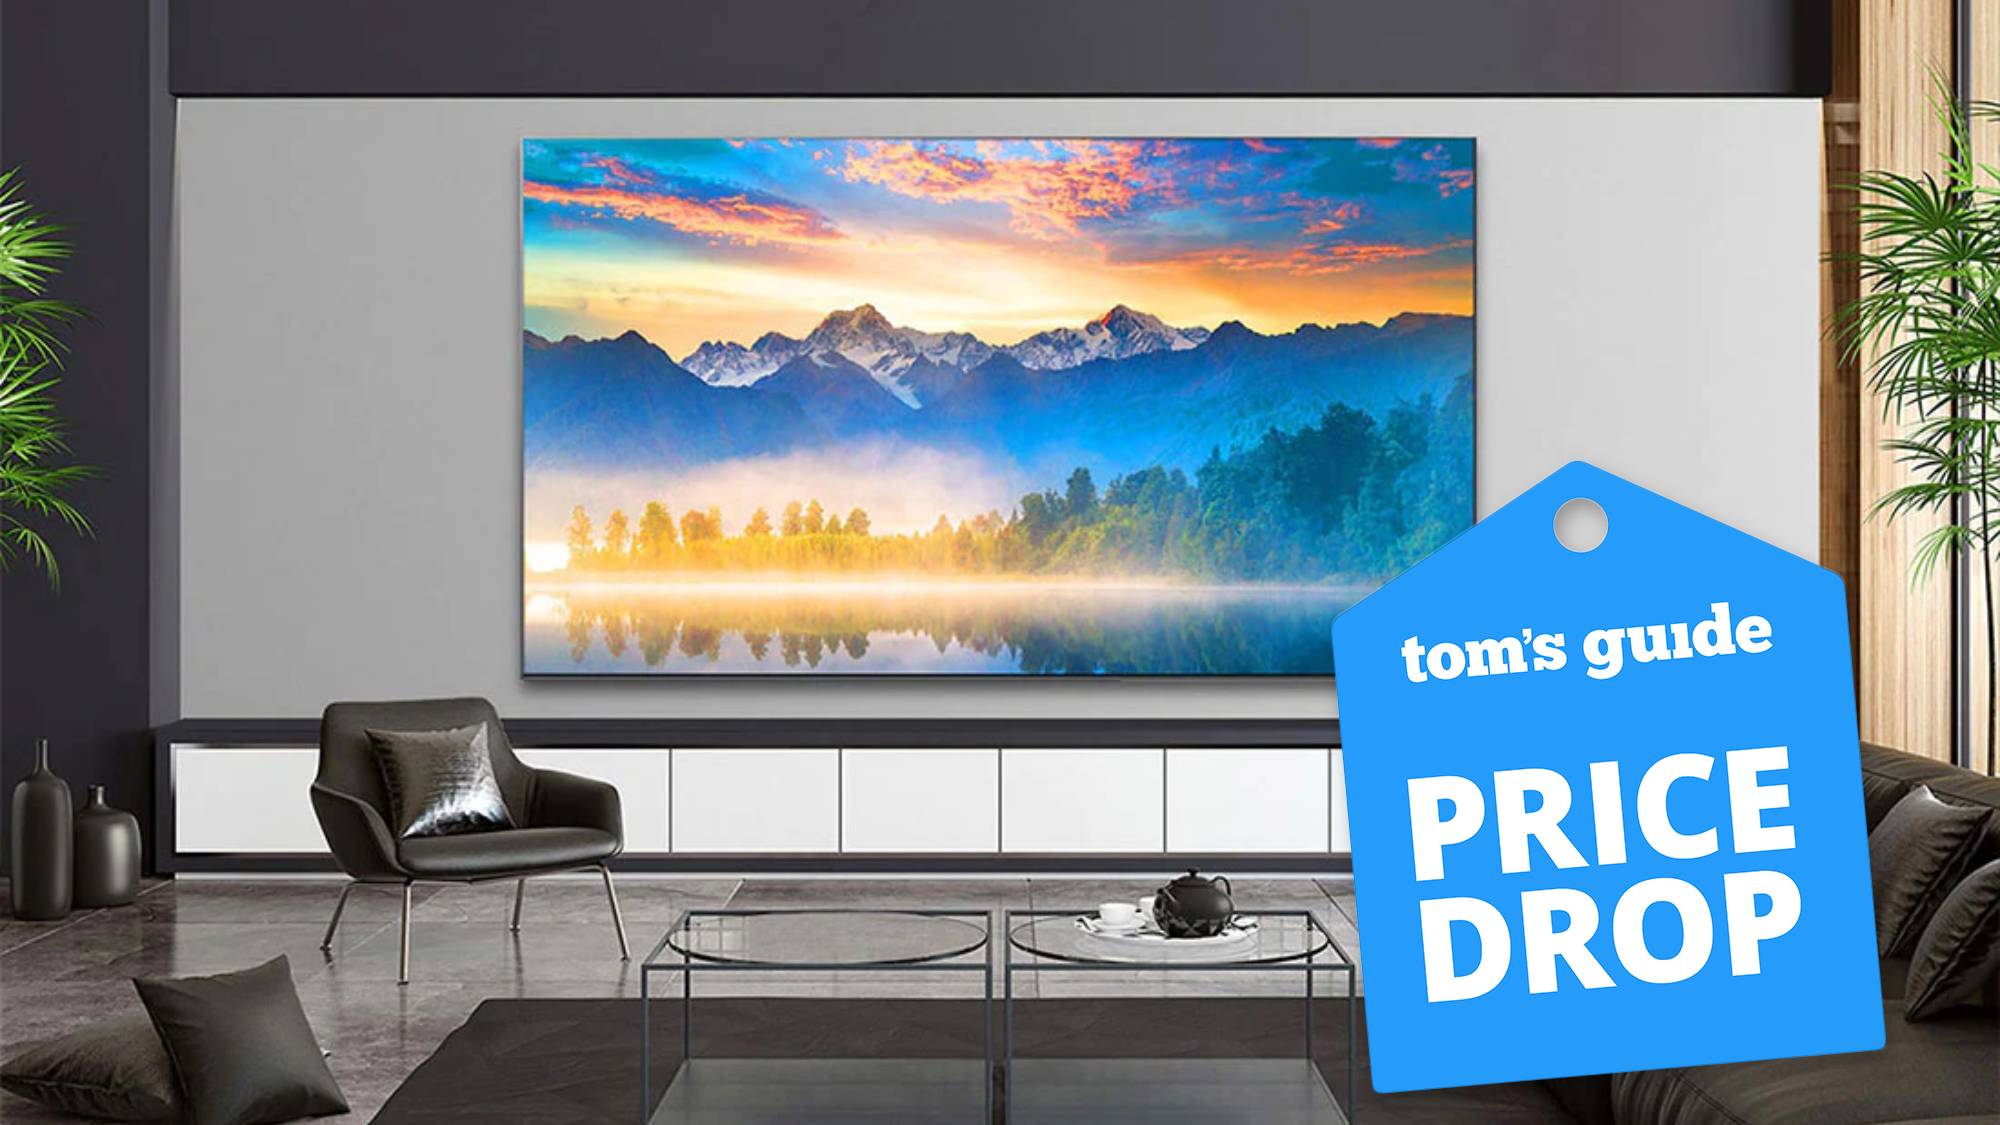 LG Class NanoCell 99 Series 8K LED TV with Tom's Guide deals label